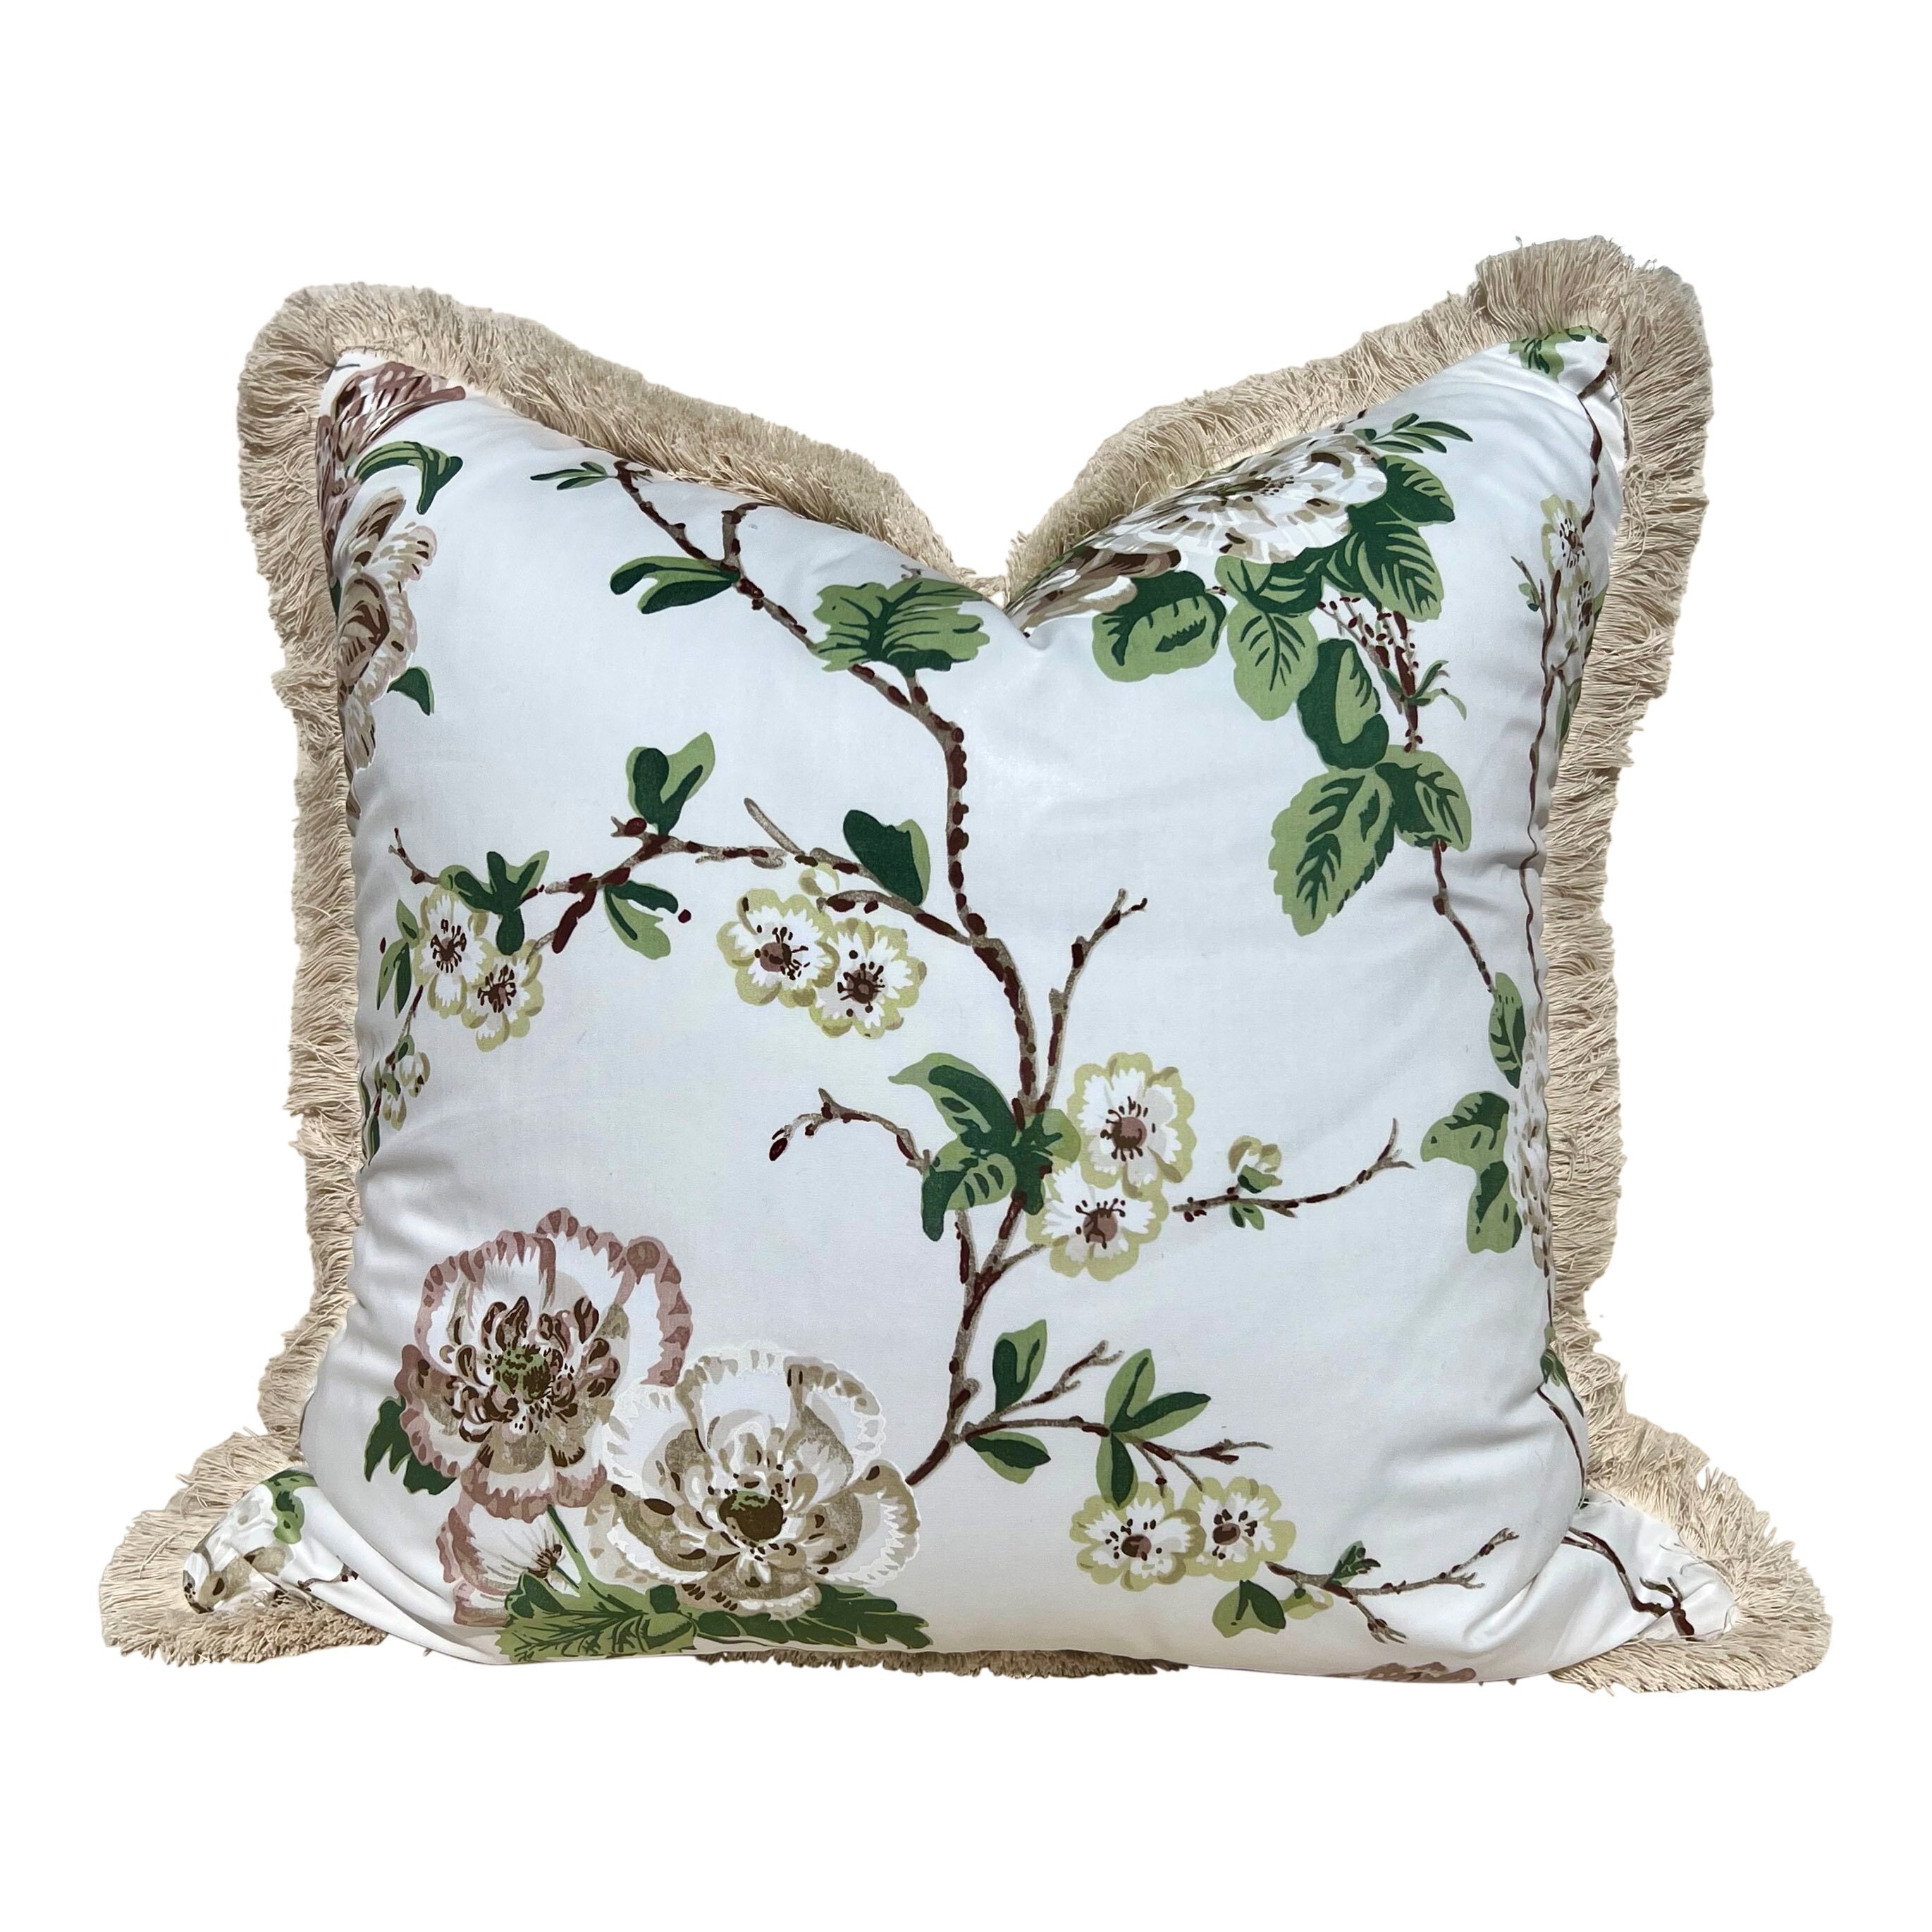 White Blossoms and Bird - 20 x 20 needlepoint pillow – Deluxe Pillows